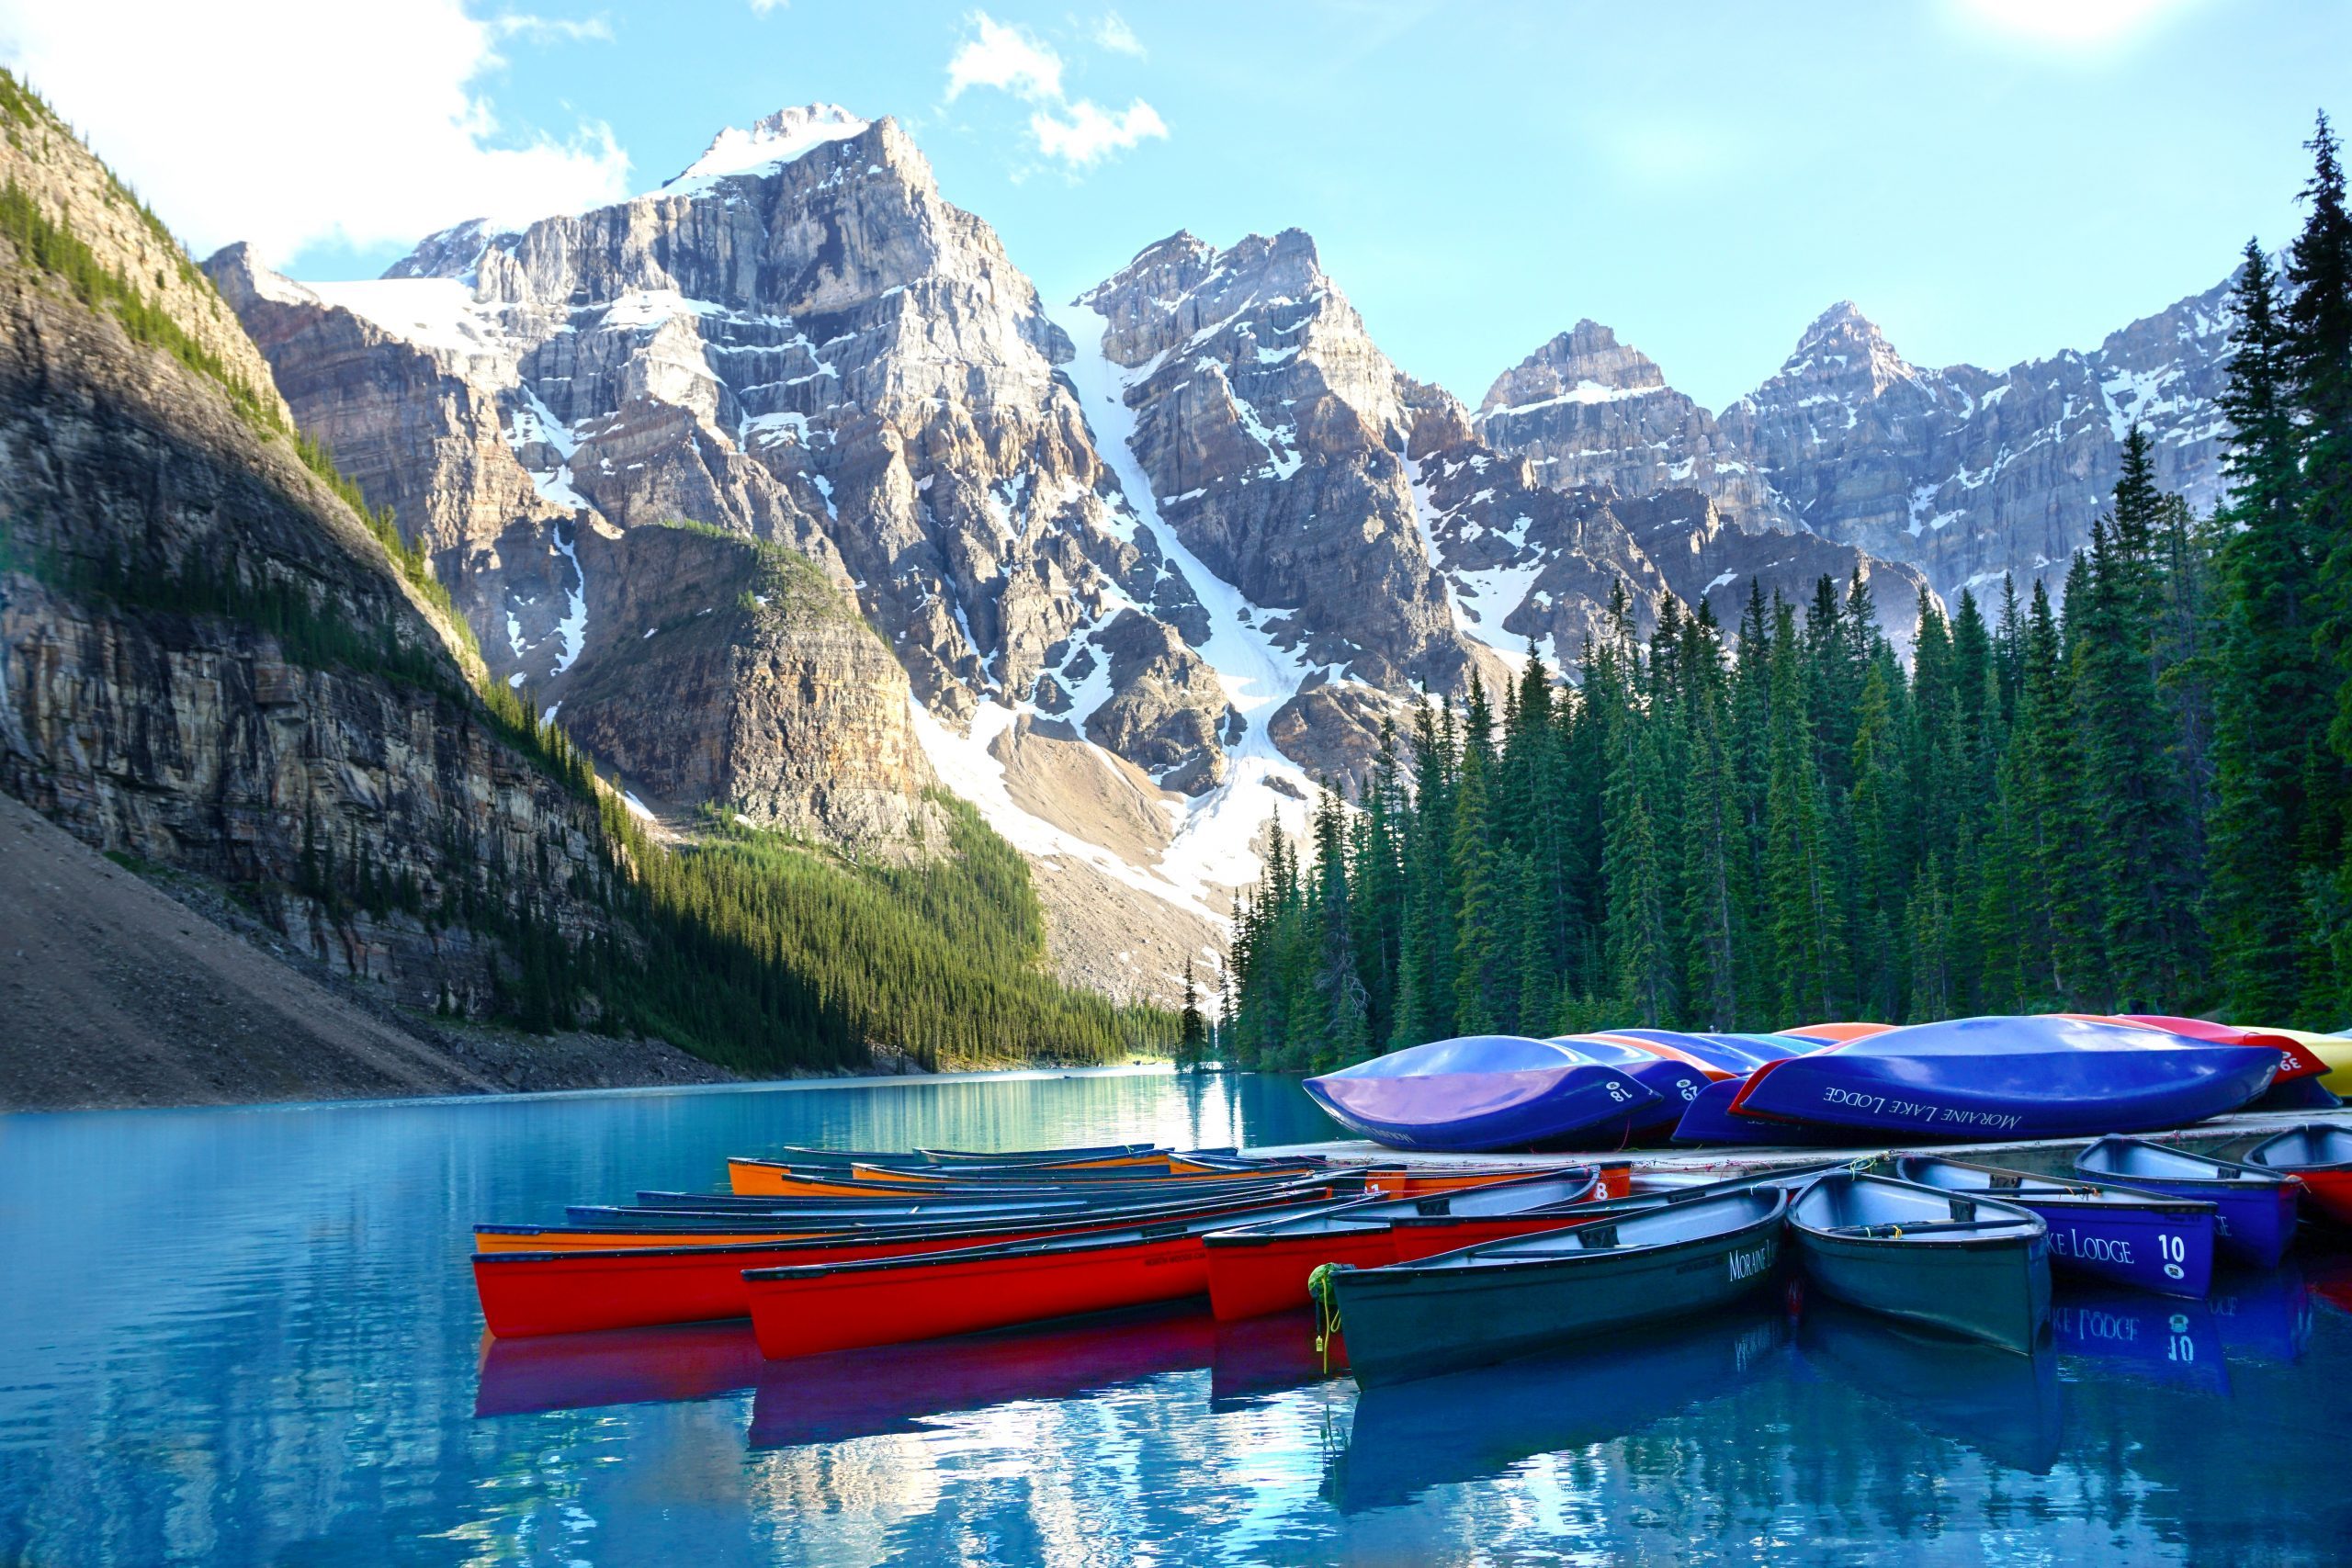 Canoes piled on the dock at the end of the day. Moraine Lake, Banff